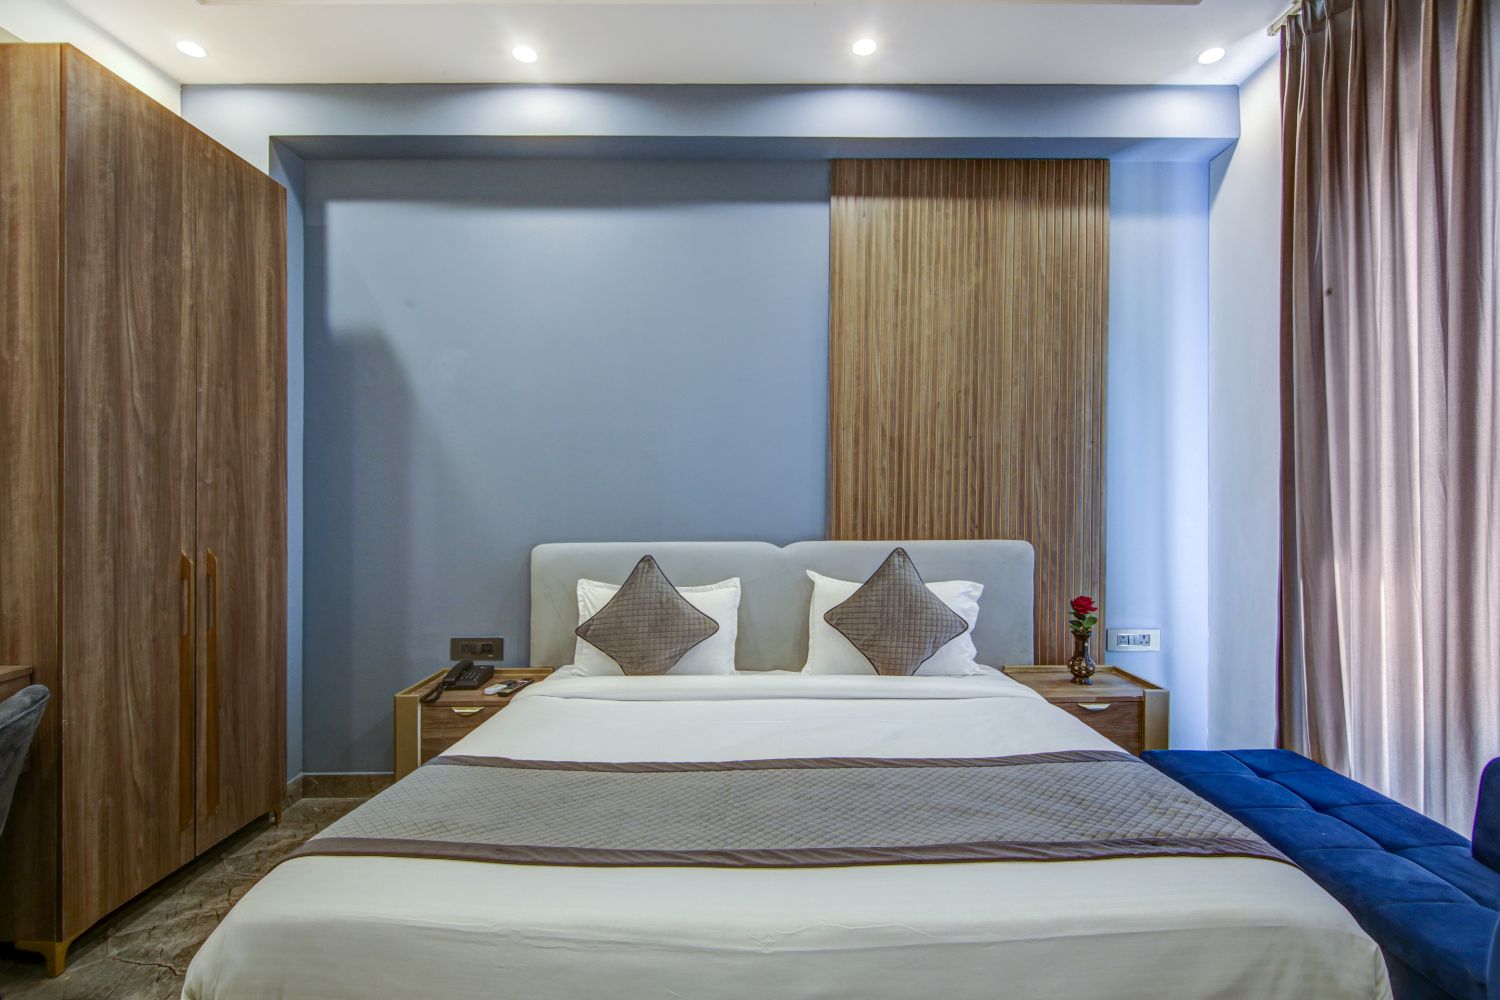 Deluxe Rooms Charges in noida Sec 143